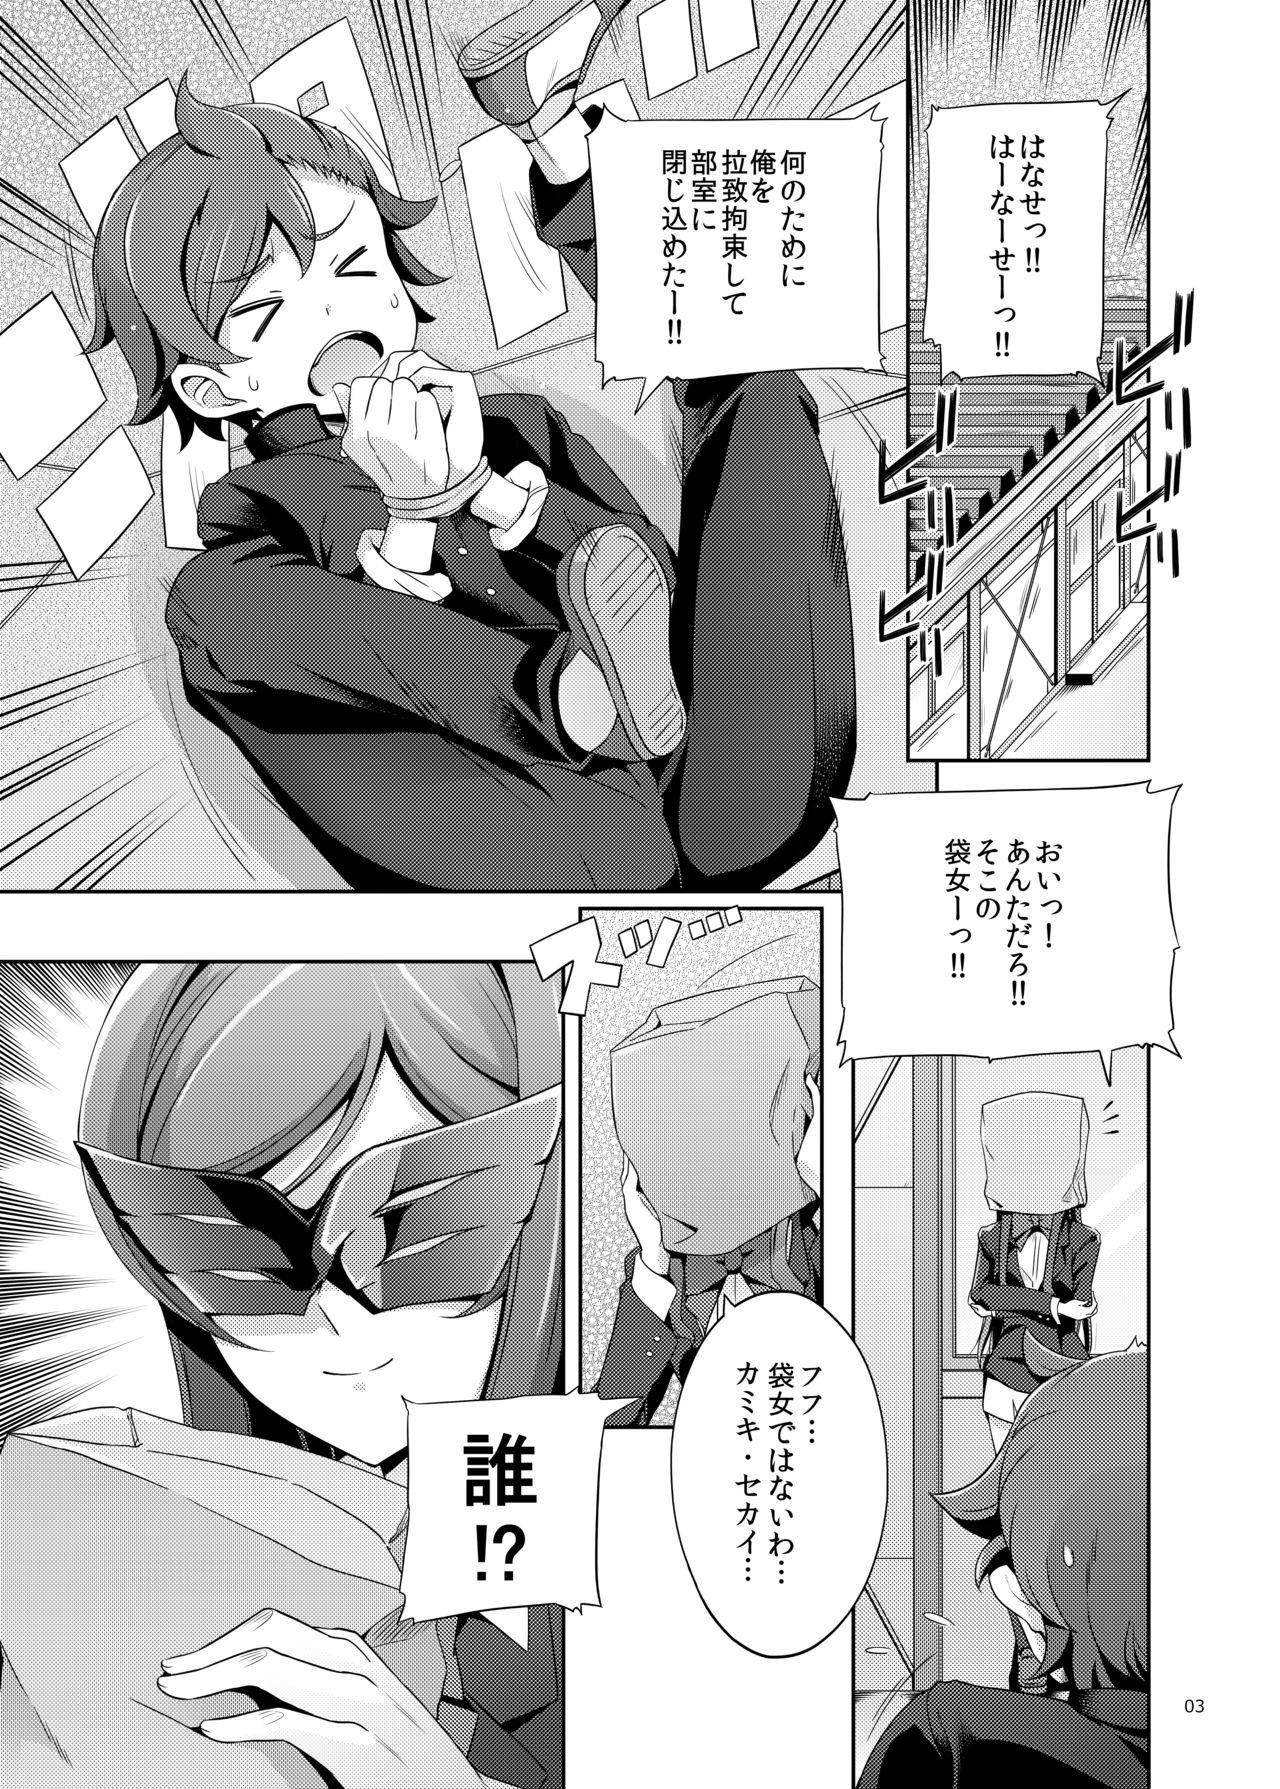 Best Namahame Try! - Gundam build fighters Gundam build fighters try Raw - Page 2